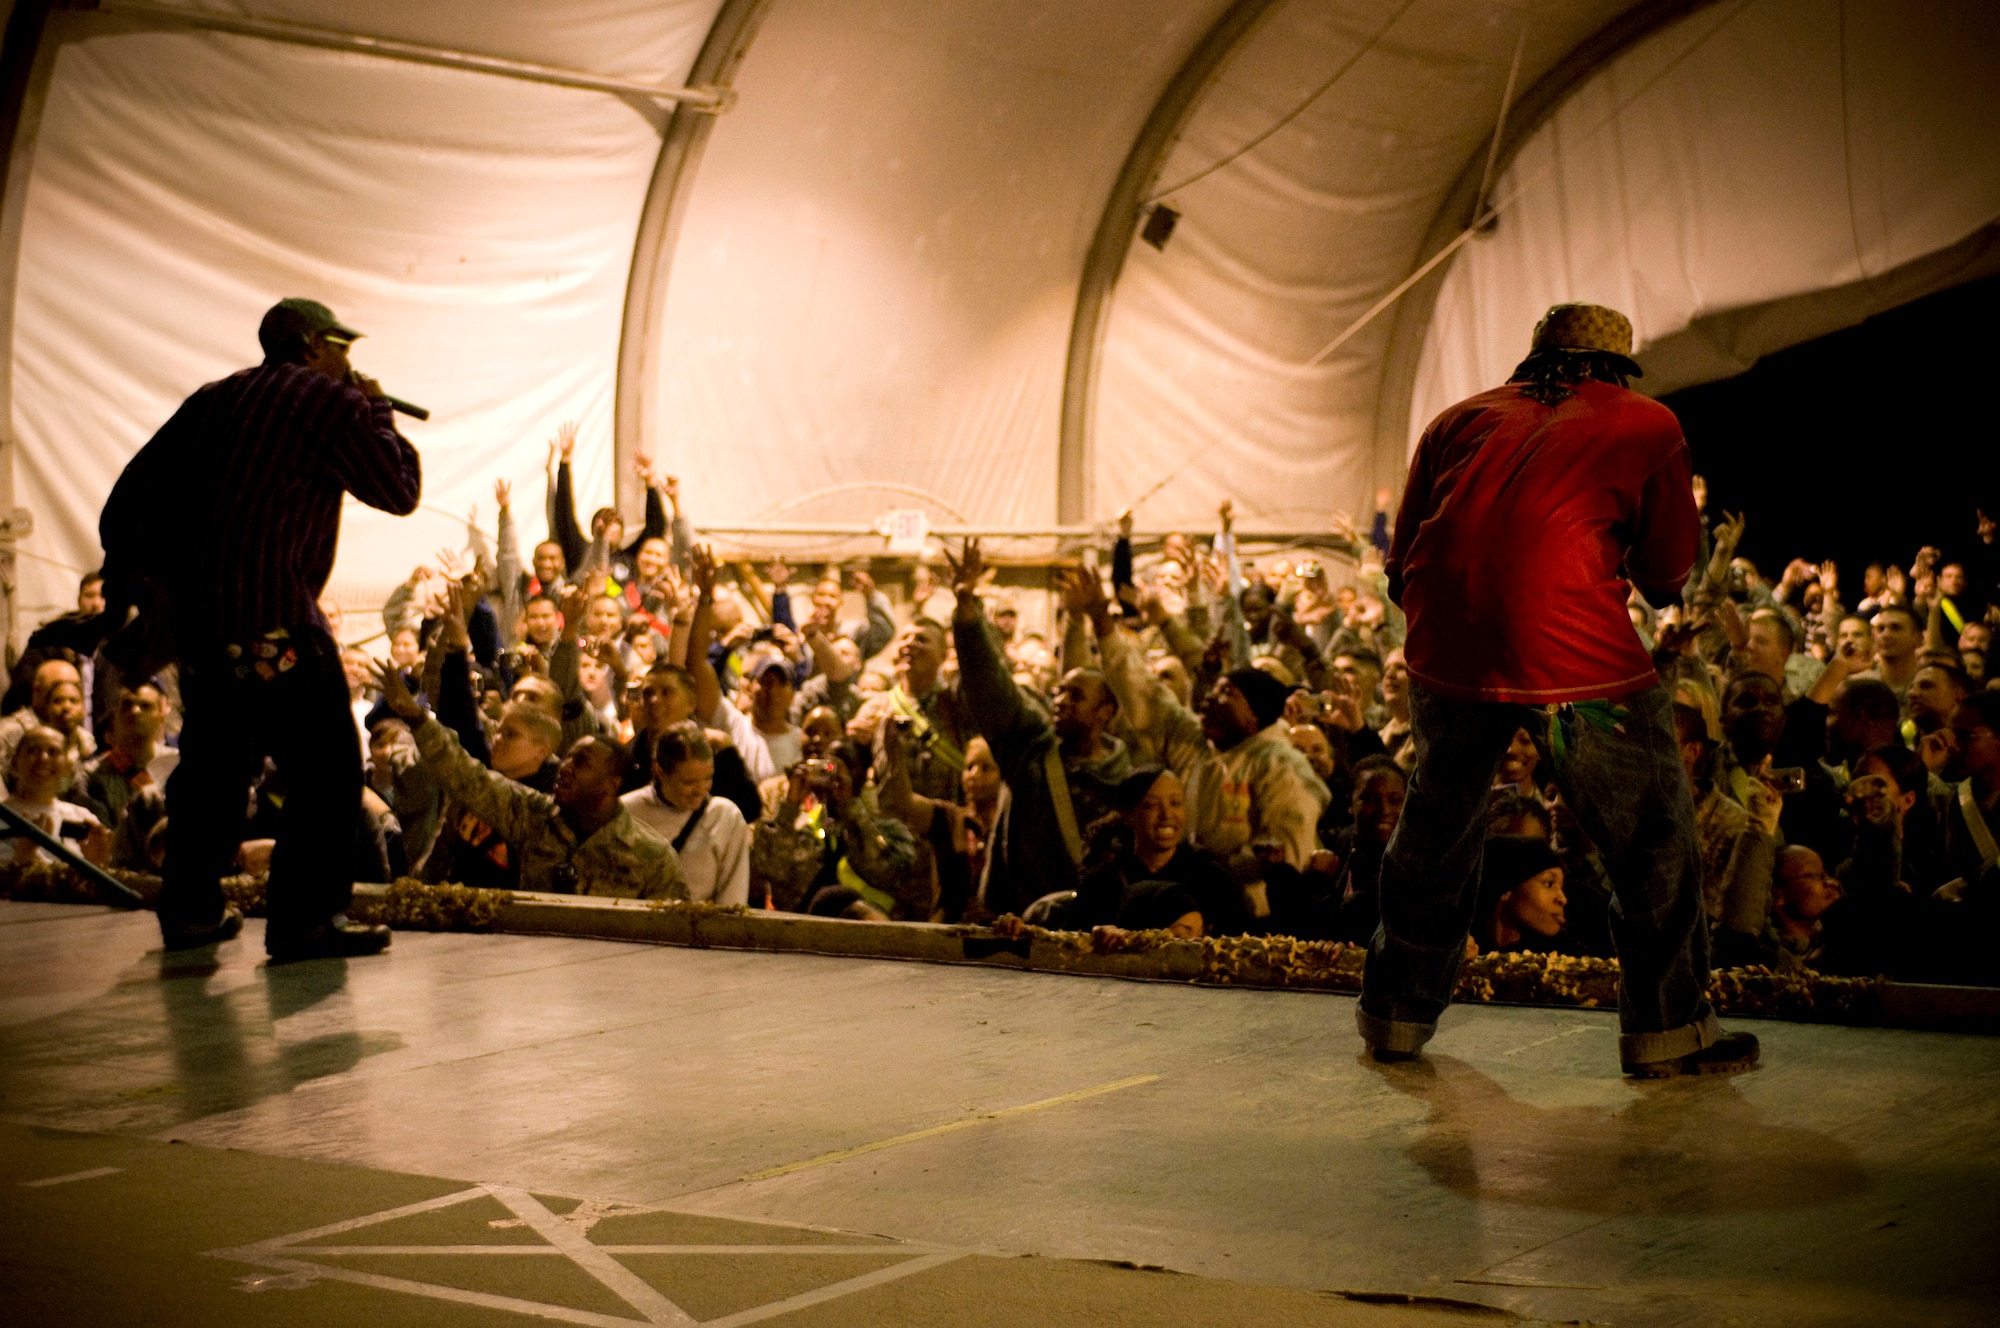 Kaine and D-Roc of rap group "Yin Yang Twins" performs with USO Tour "Around the World in 8 Days" at Bagram Air Field, Afghanistan, Nov. 13. (U.S. Air Force photo by Staff Sgt. Samuel Morse)(Released)